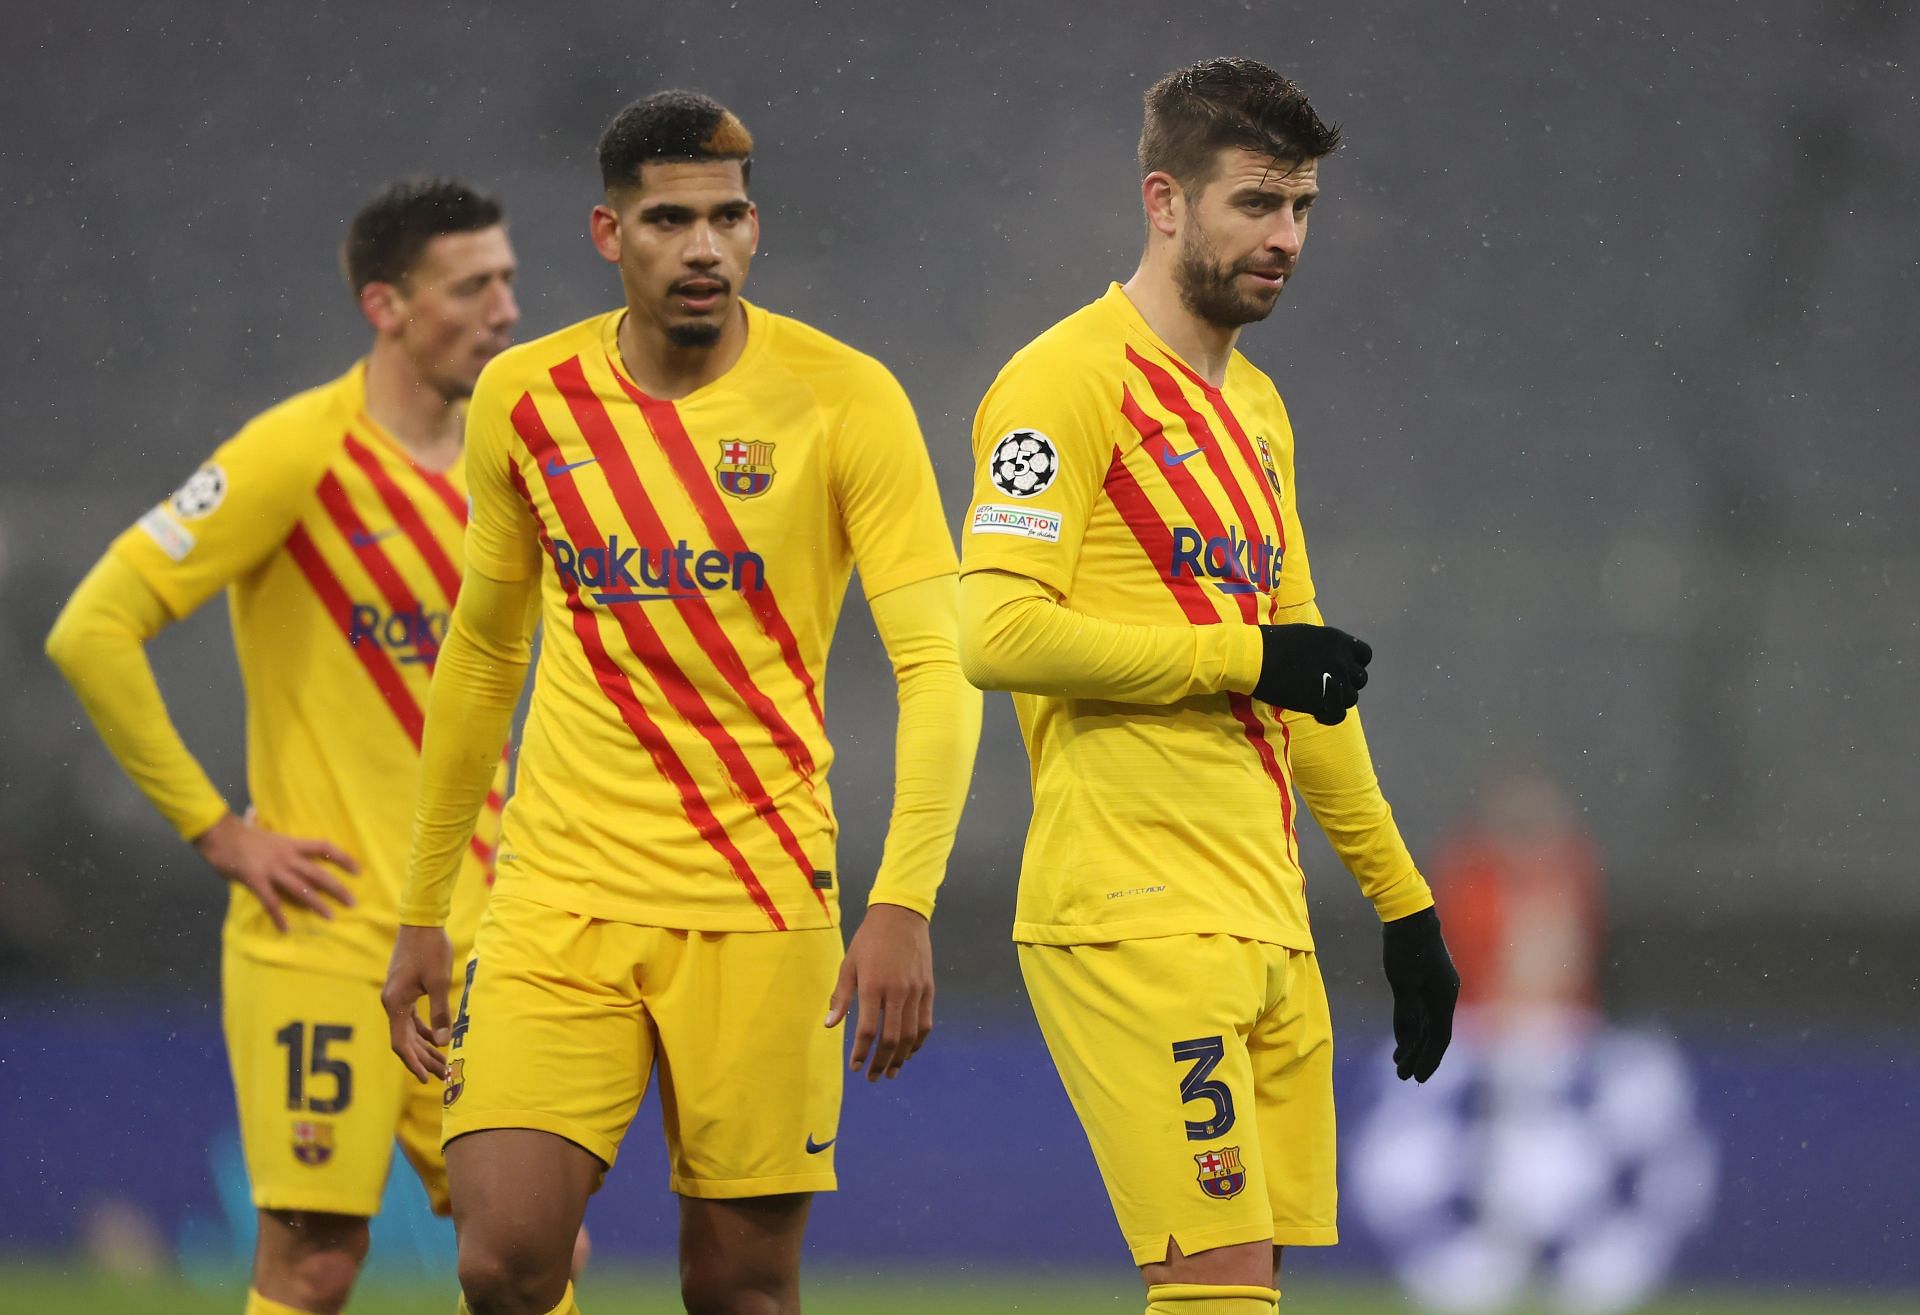 Barcelona had a nightmare Champions League run this season, culminating in a group stage exit.